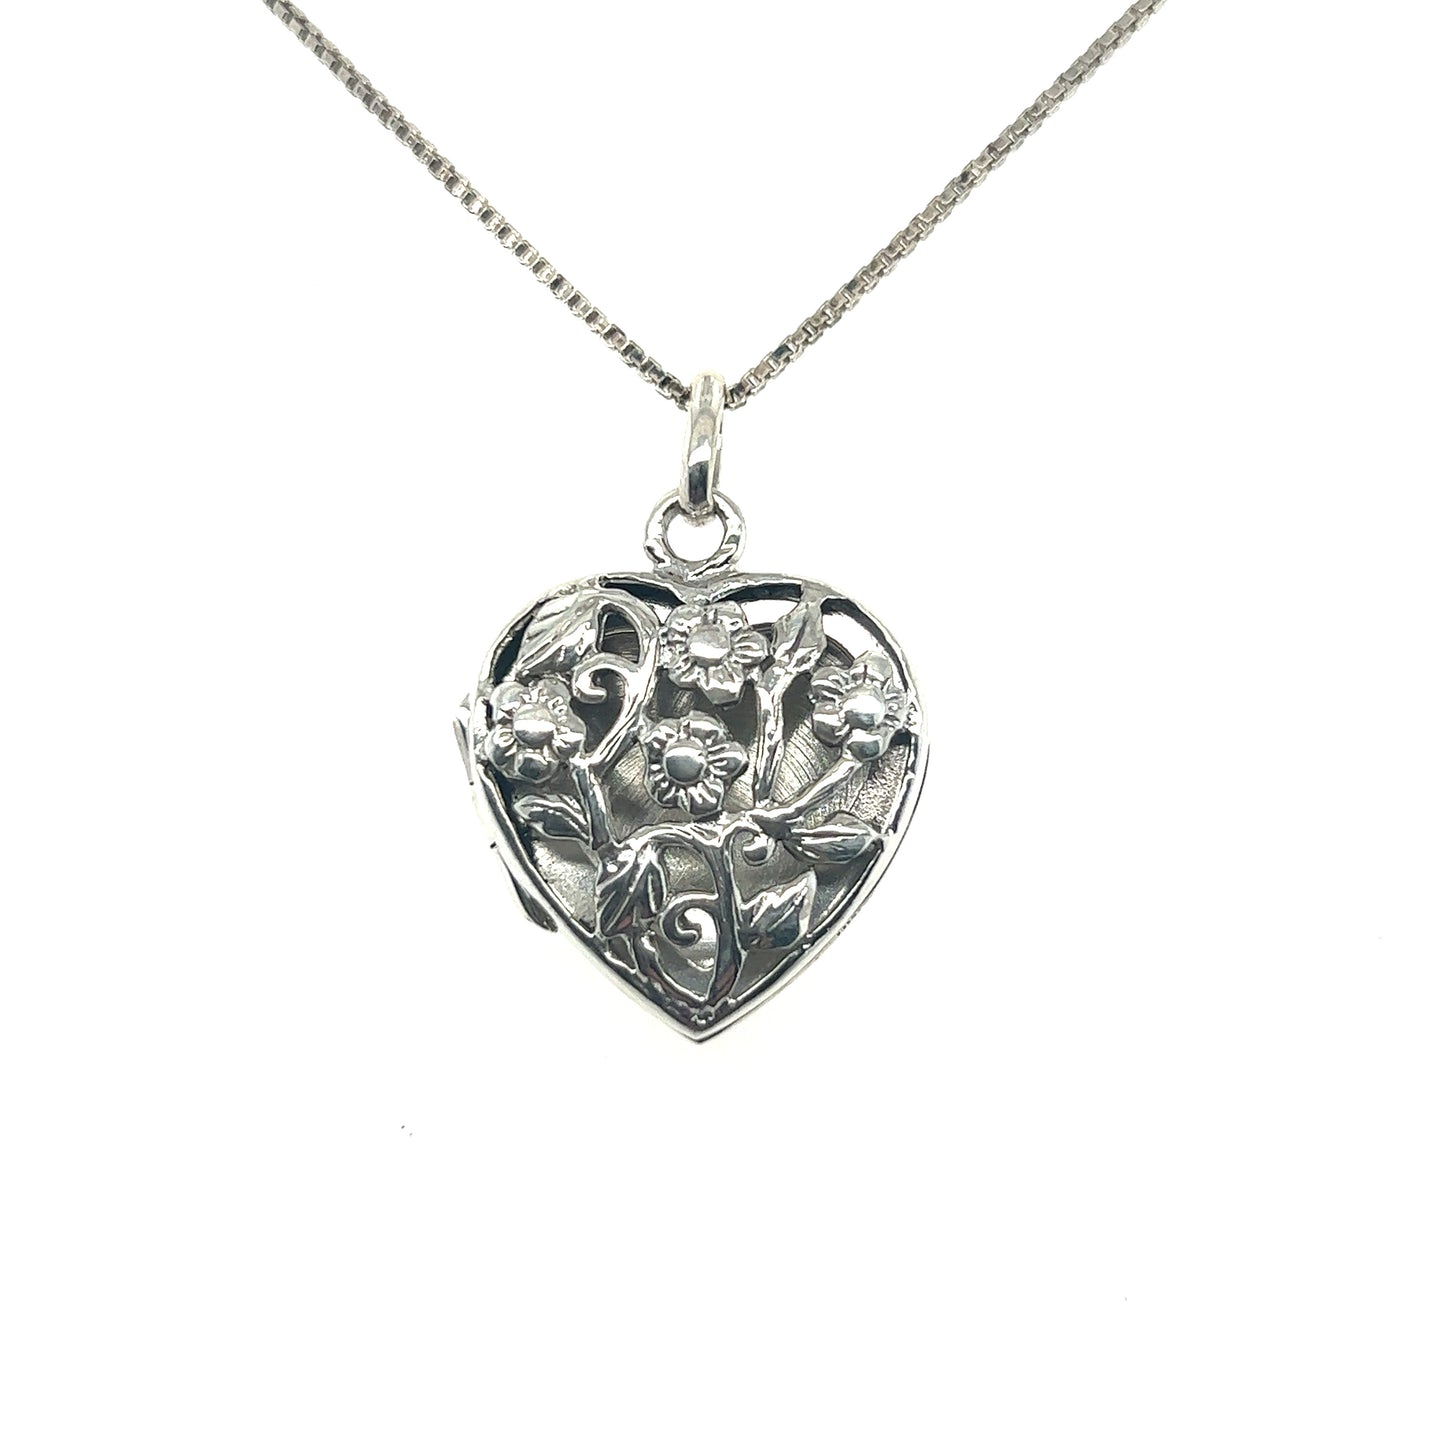 A sentimental gift with a vintage style, featuring a Super Silver Floral Open Heart Locket on a chain.